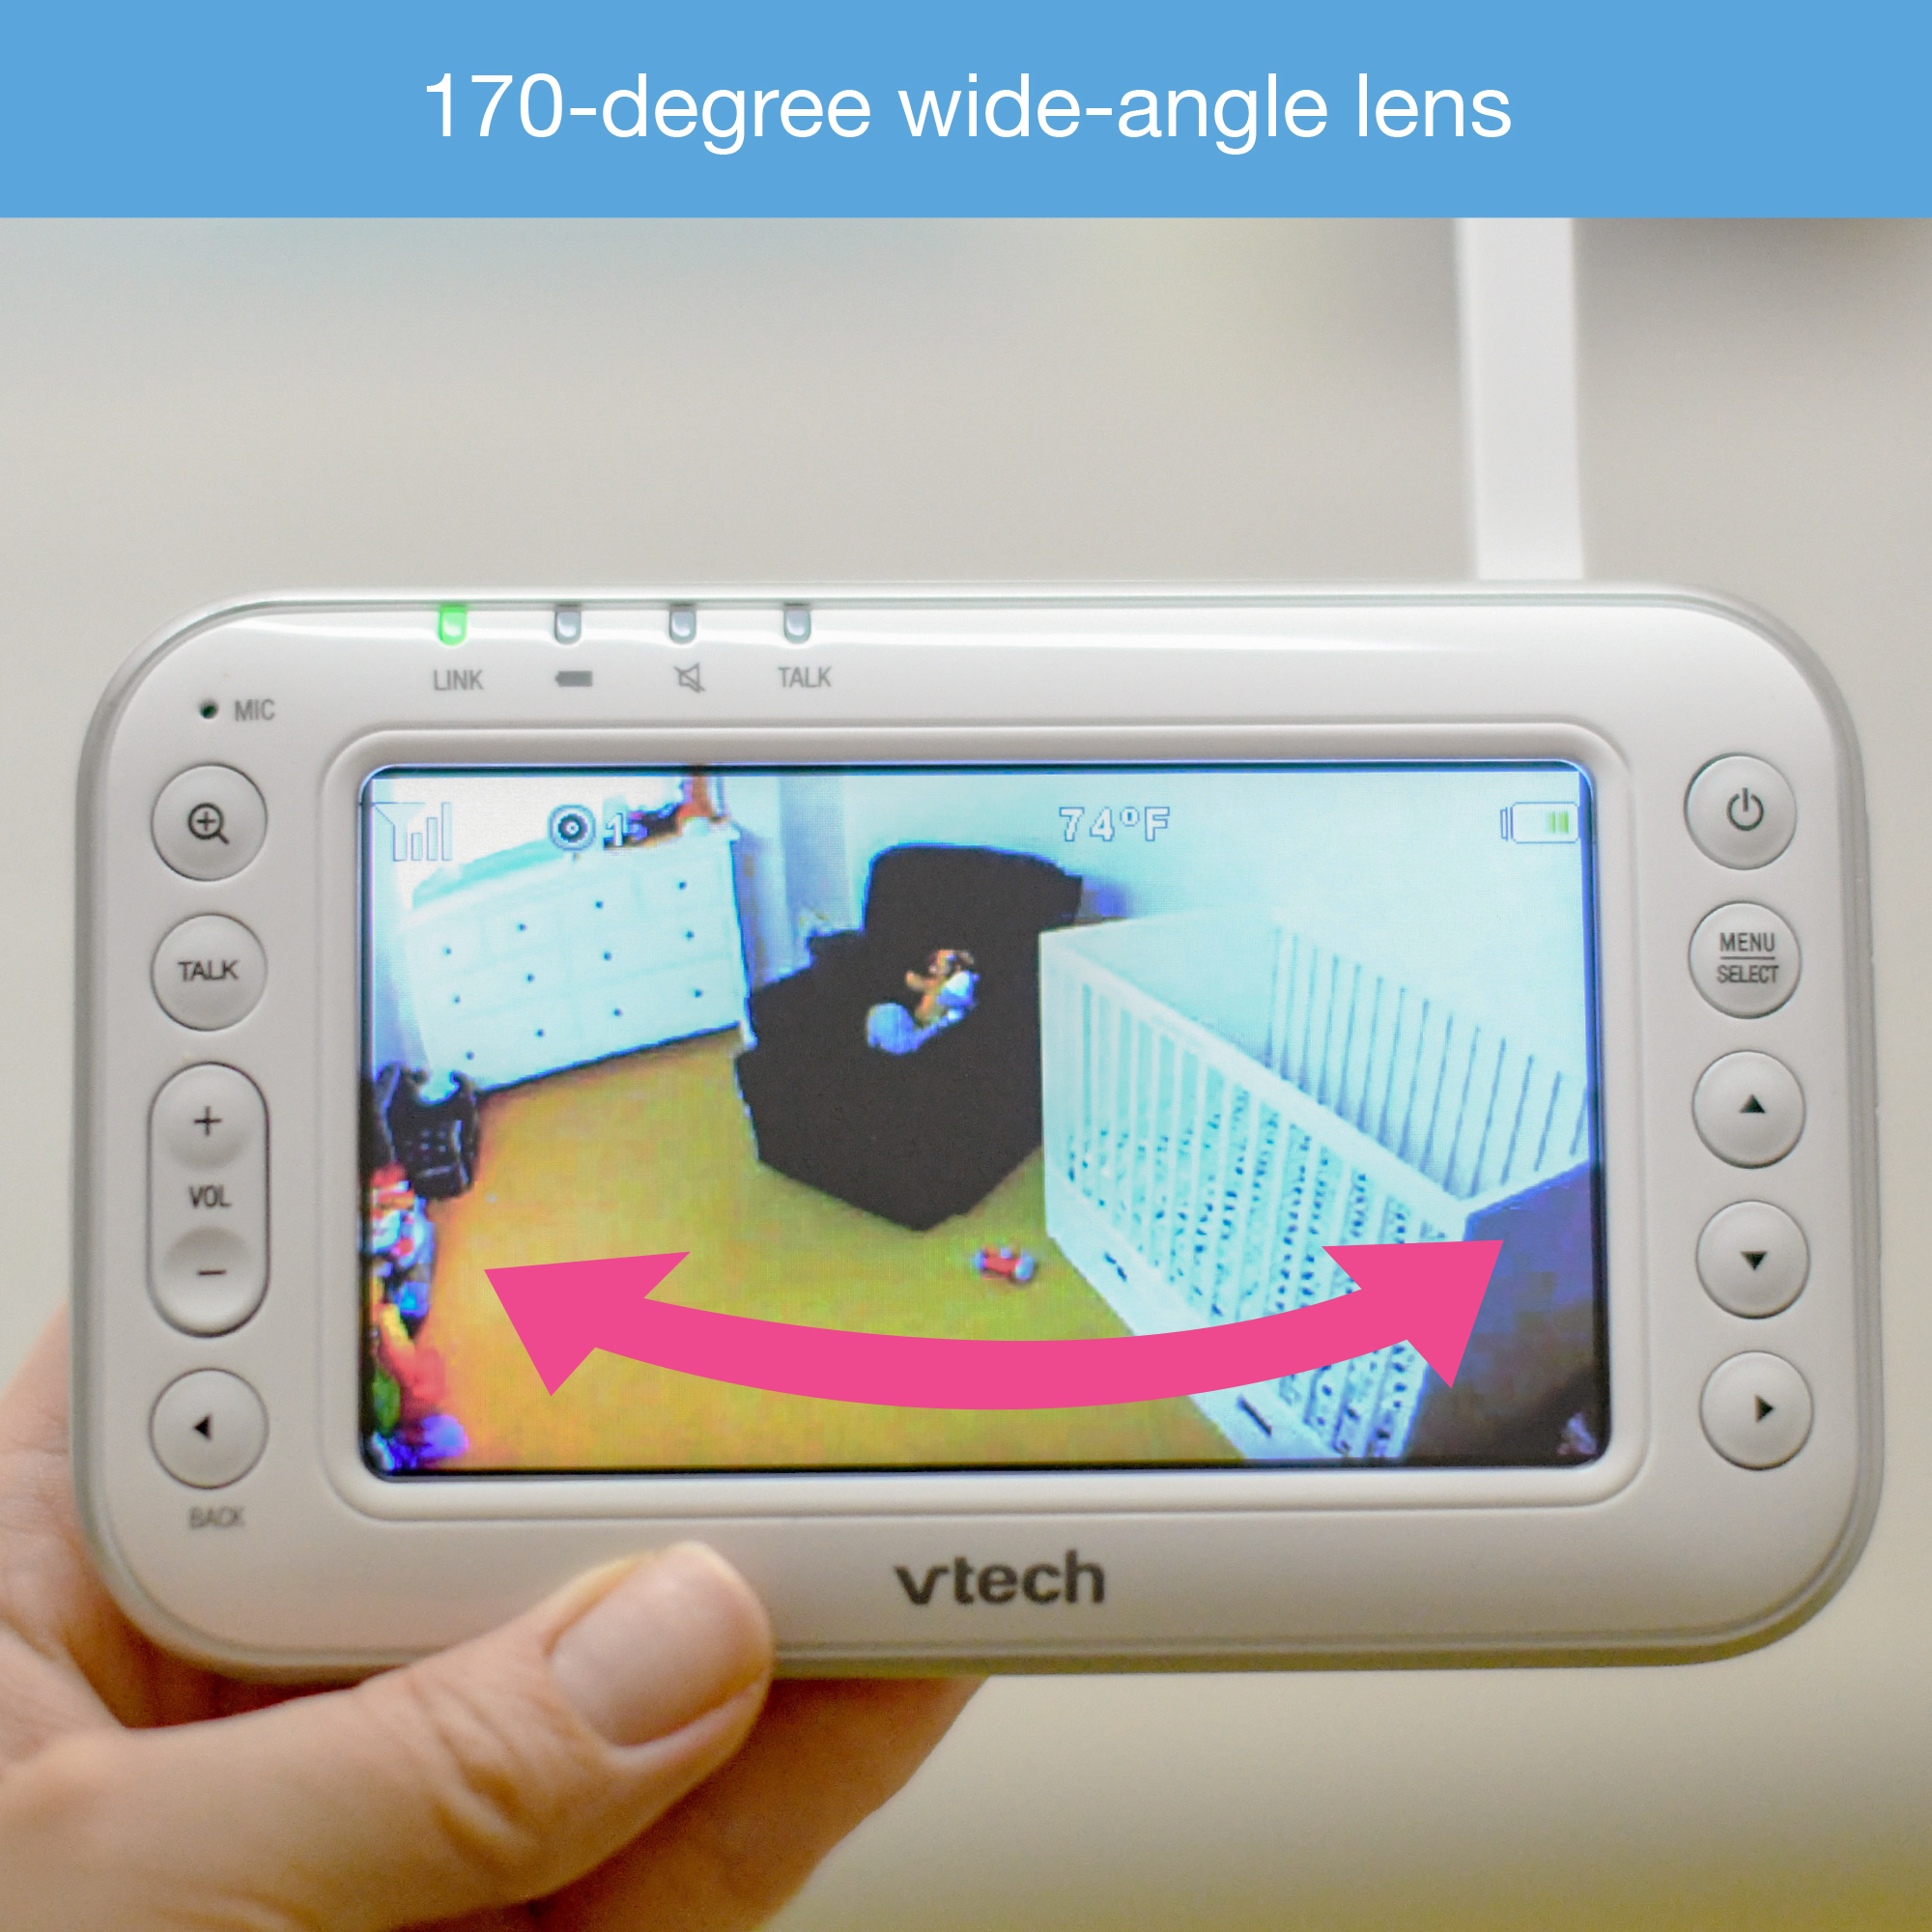 VTech VM4261, 4.3" Digital Video Baby Monitor with Pan & Tilt Camera, Wide-Angle Lens and Standard Lens, White - image 12 of 13